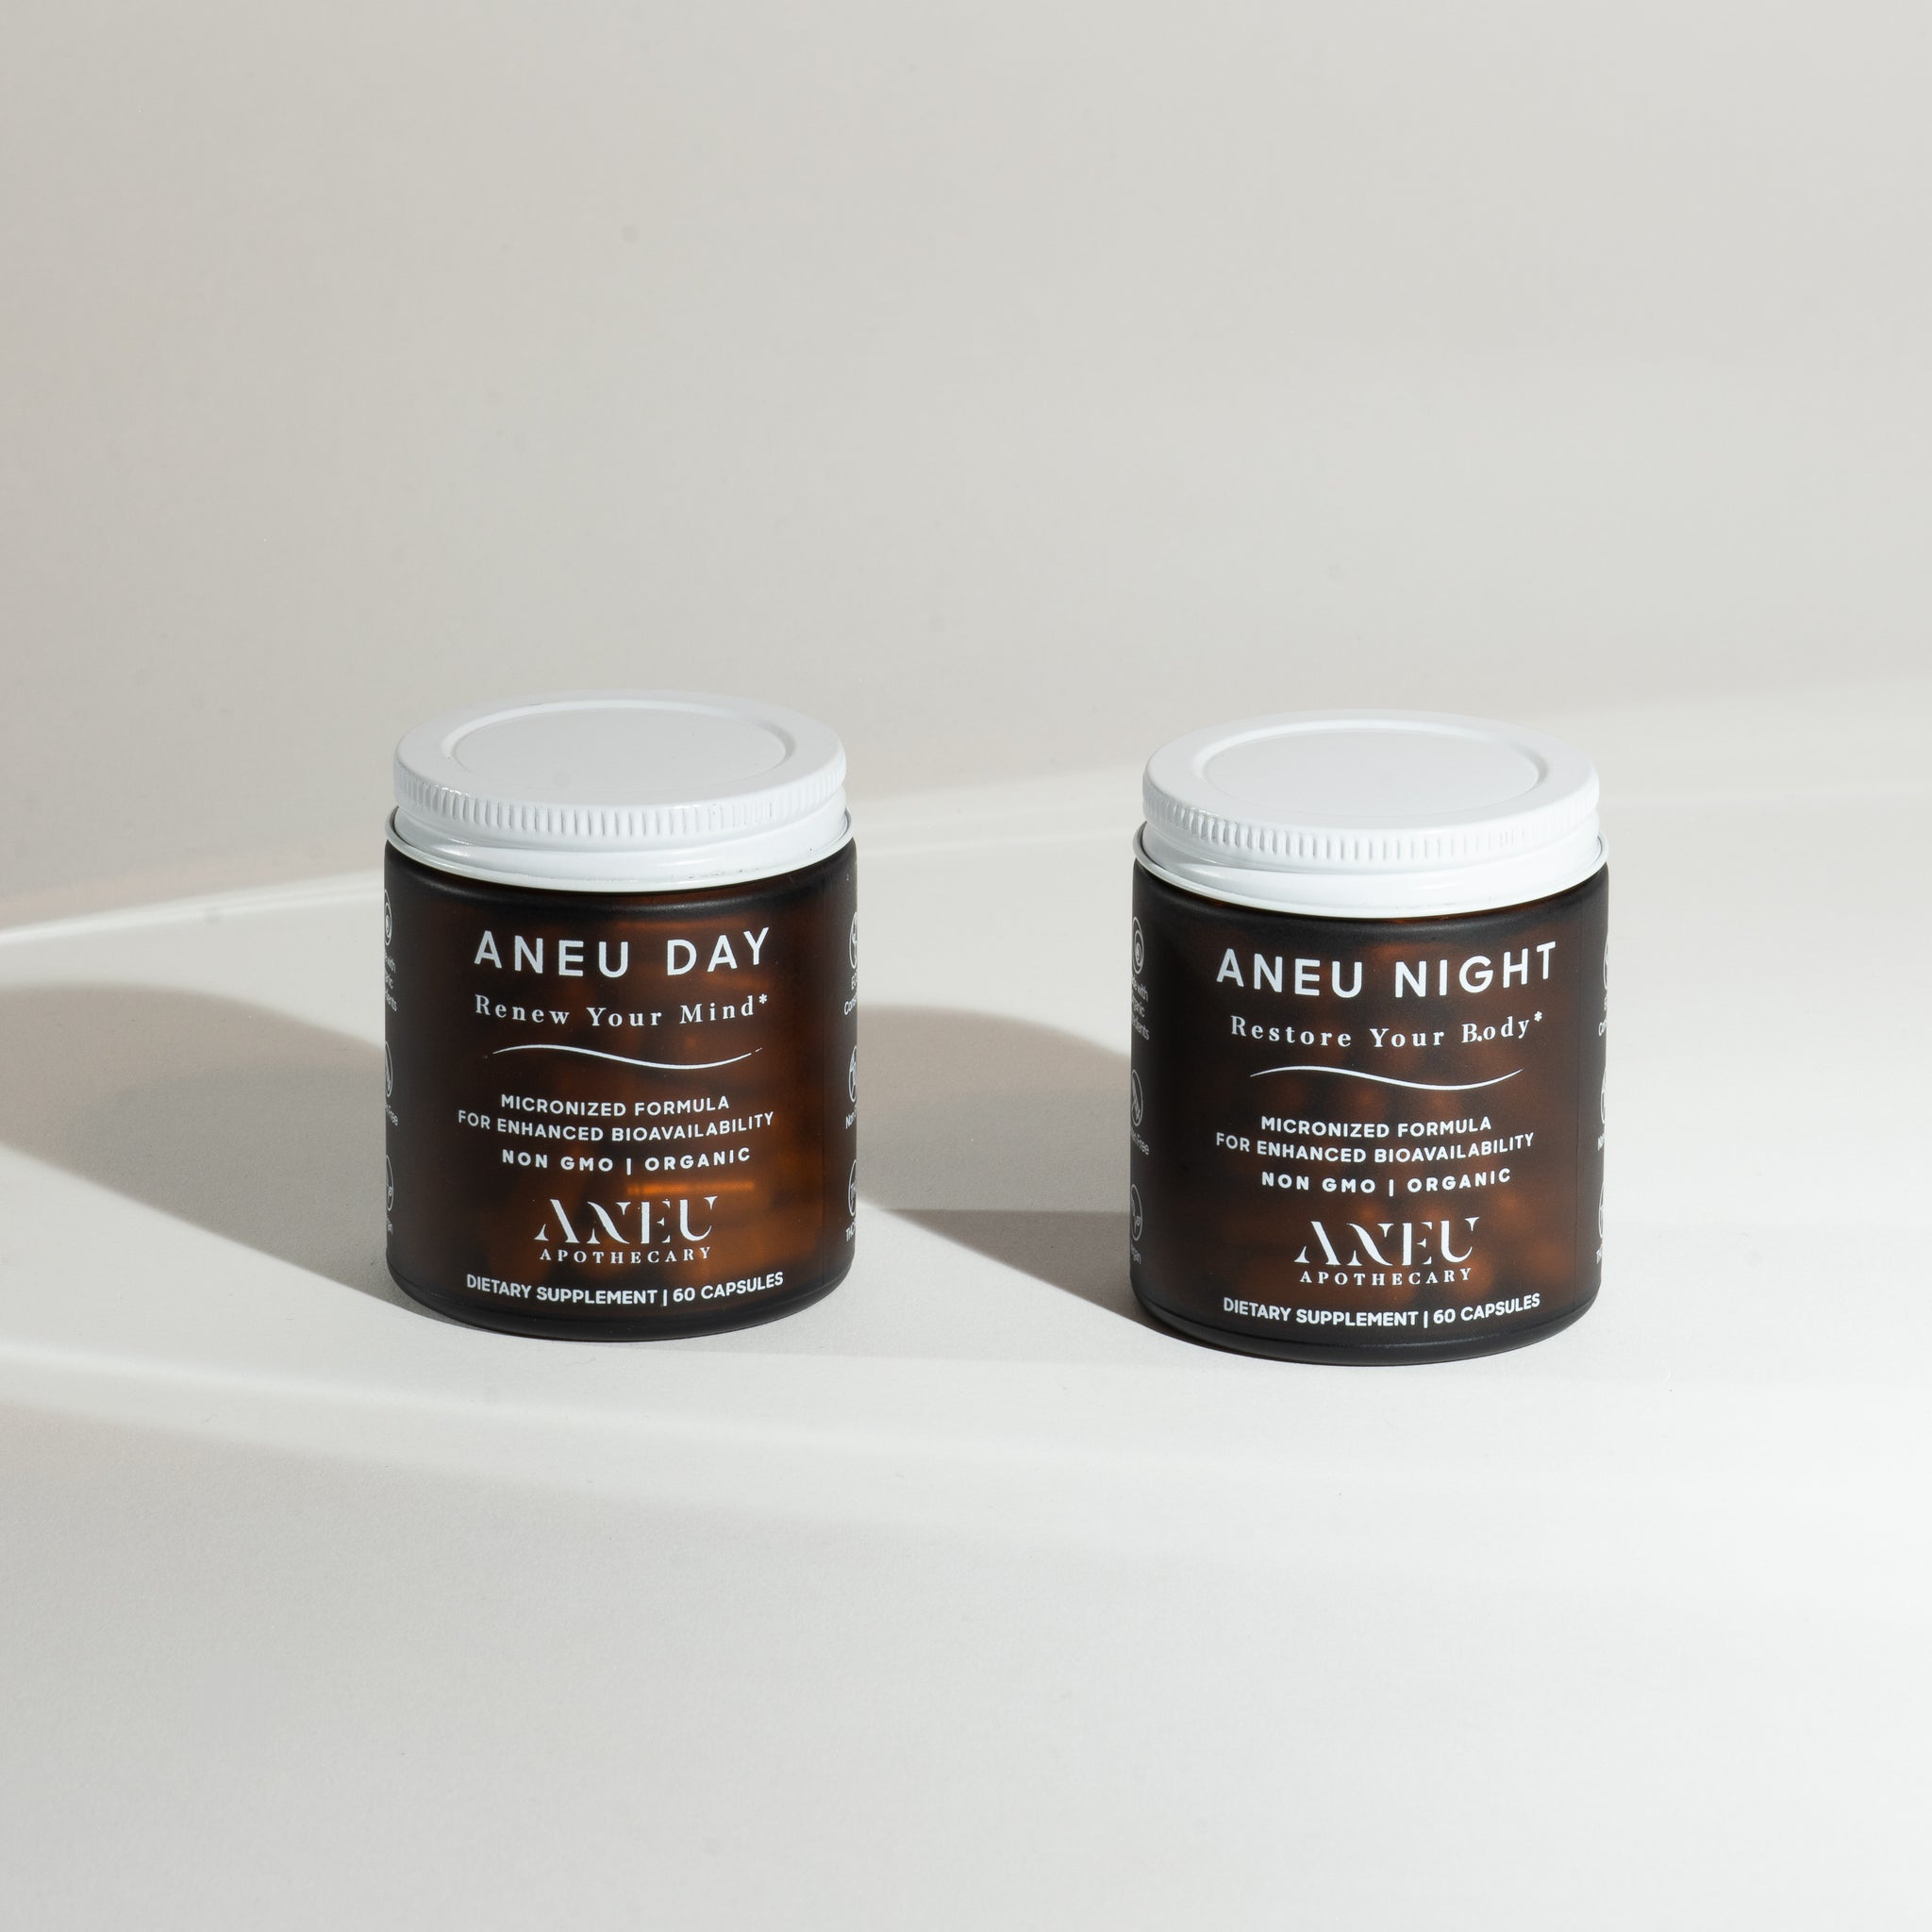 aneu day and aneu night rhythm line supplements from aneu apothecary